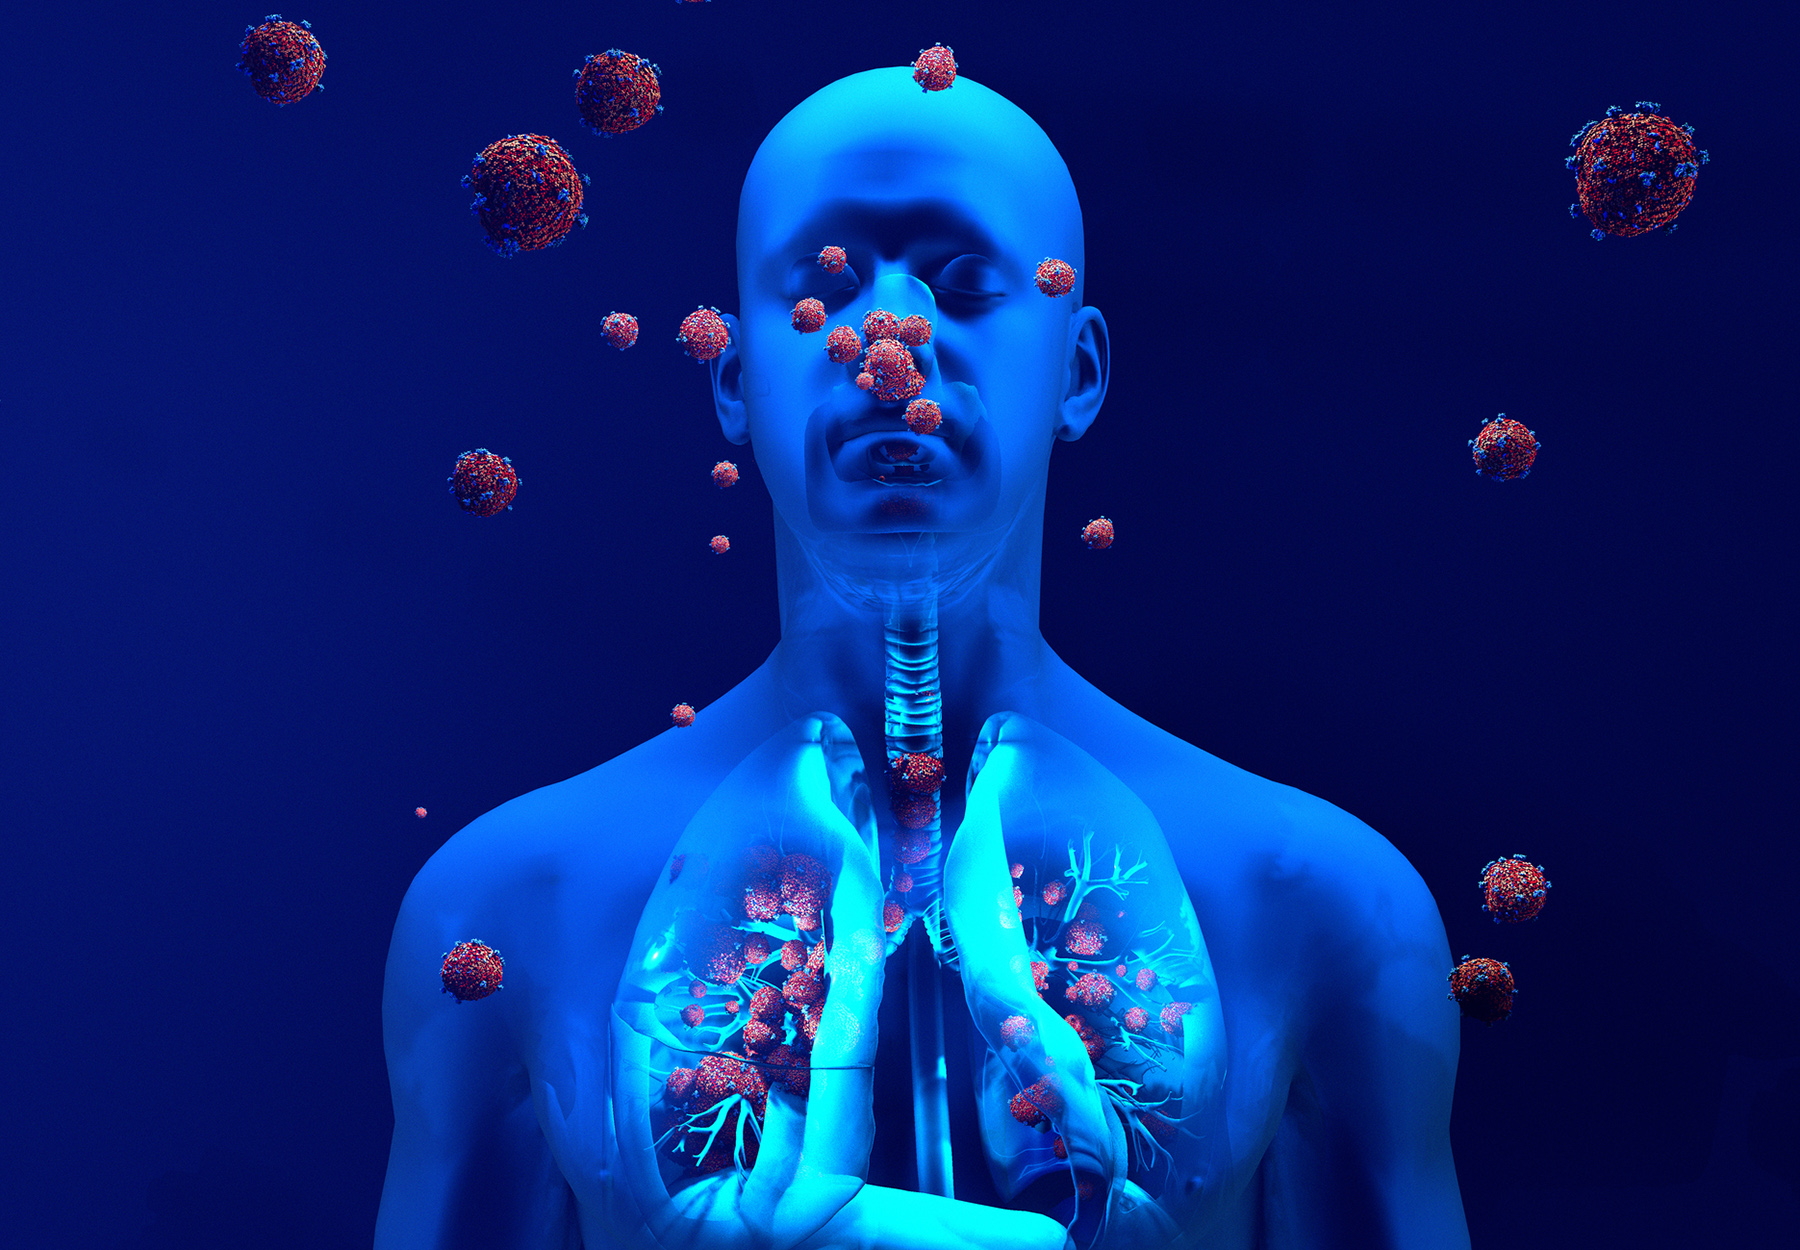 Droplets infected with a virus spray into the air, Human lungs infected by the Coronavirus or by virus, Respiratory infection caused by a virus. SARS